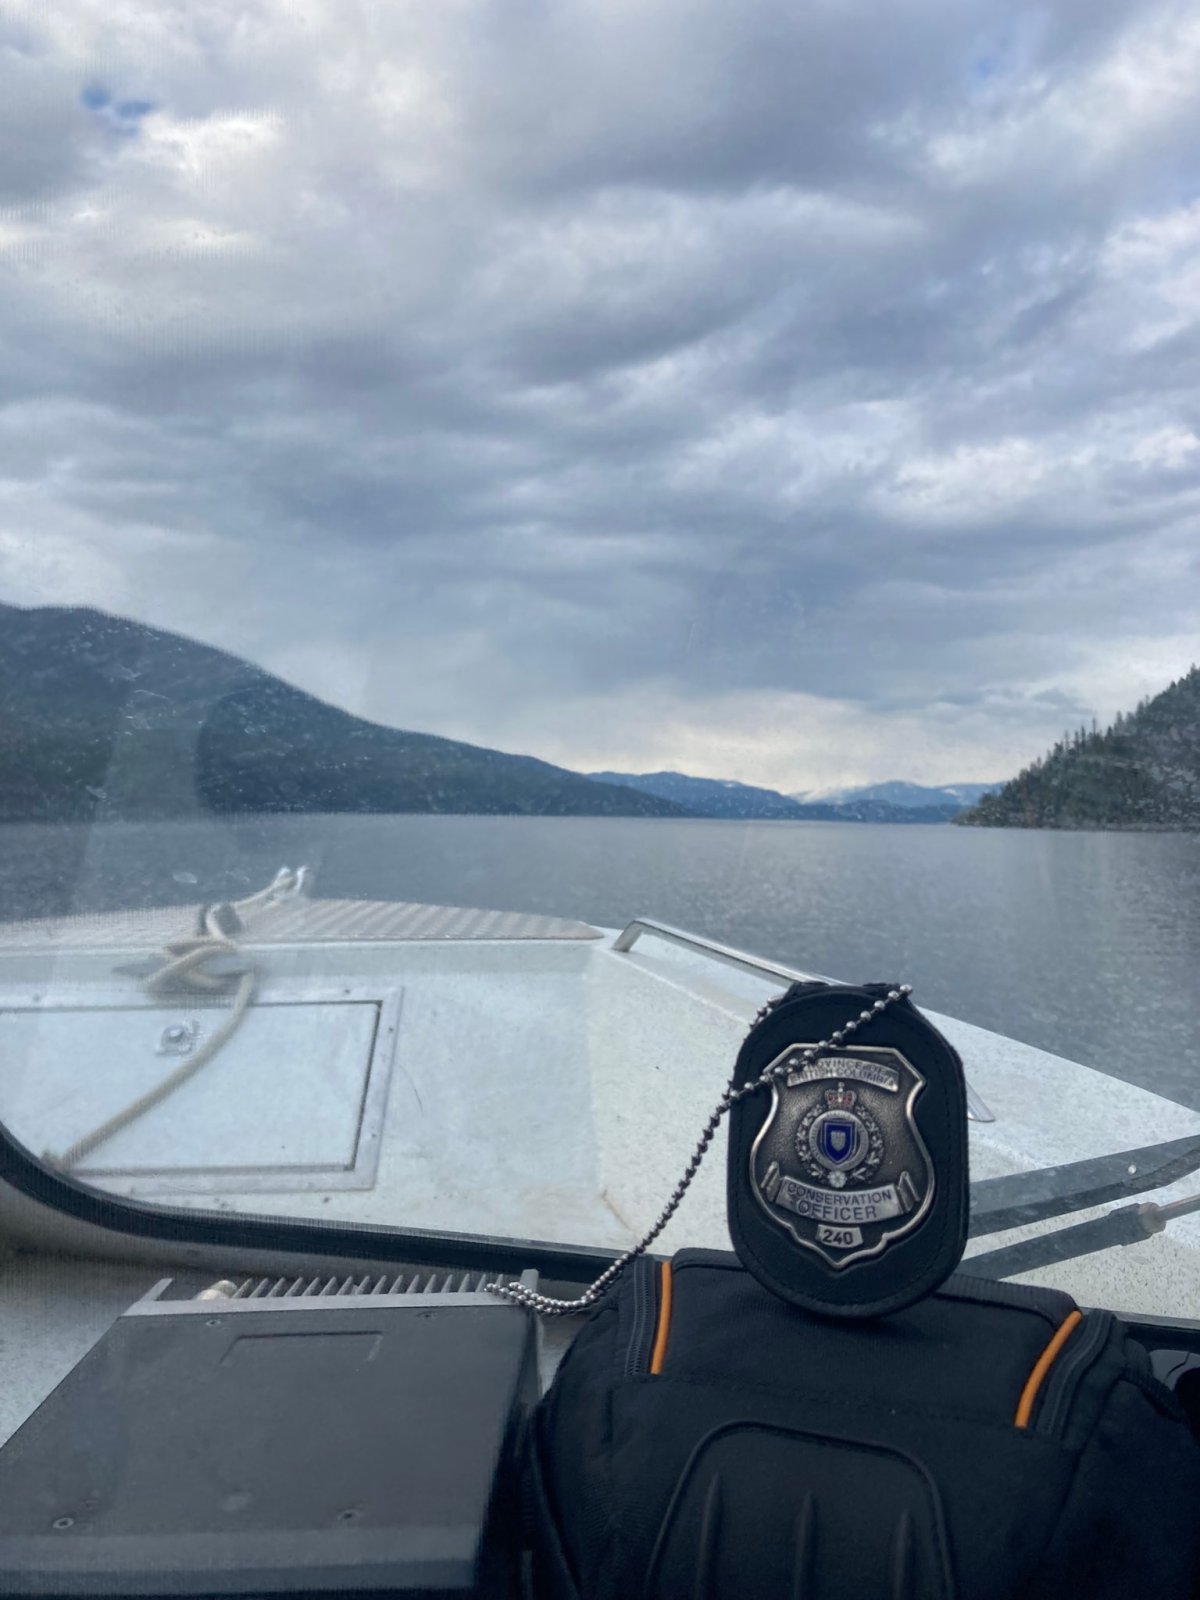 BCCOS were out on Shuswap Lake conducting angling inspections.